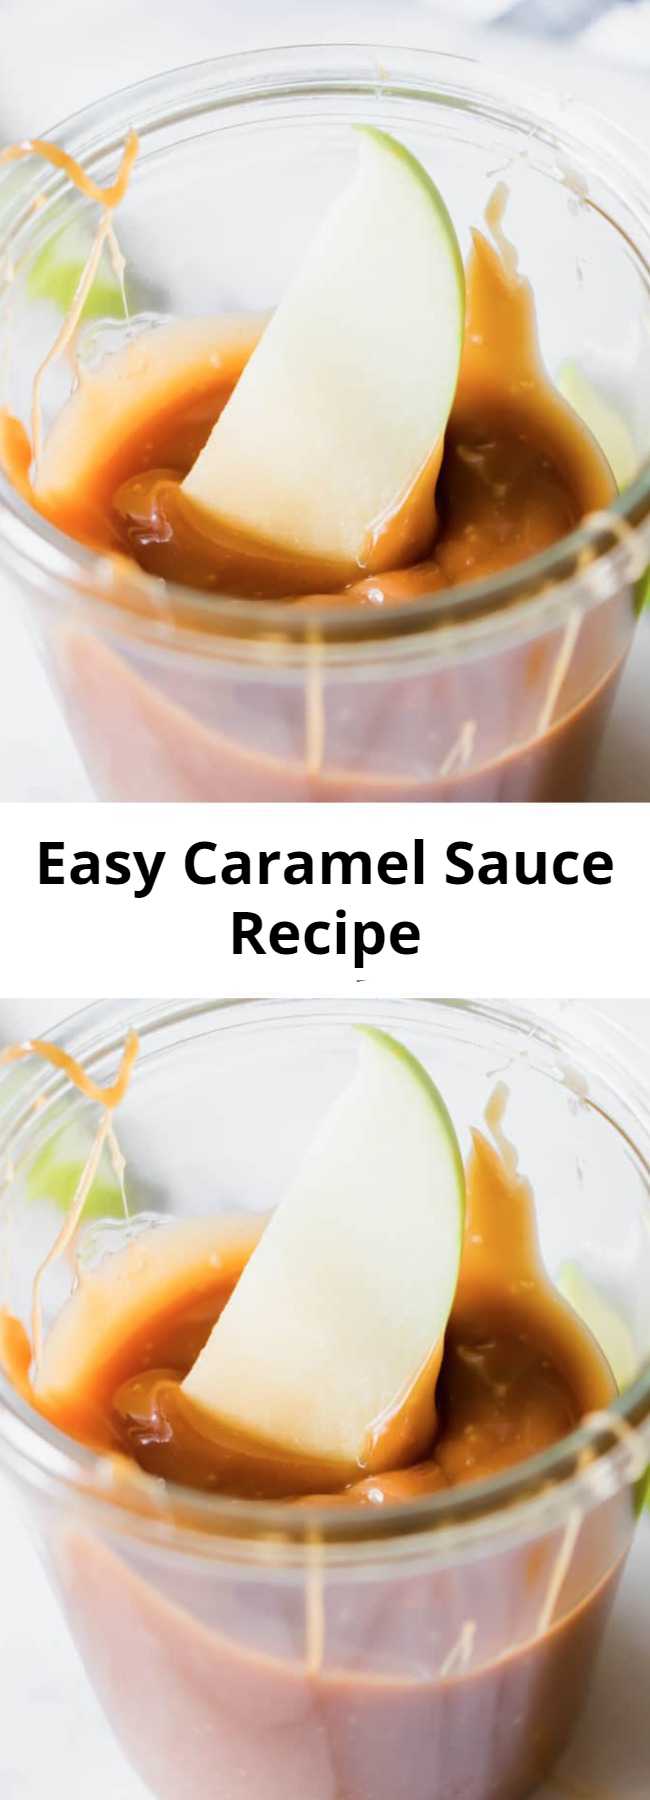 Easy Caramel Sauce Recipe - The BEST way to make caramel! Sweet and buttery, this caramel sauce is perfect for any dessert topping, or for dipping apples! Quick and easy recipe. #caramel #dessert